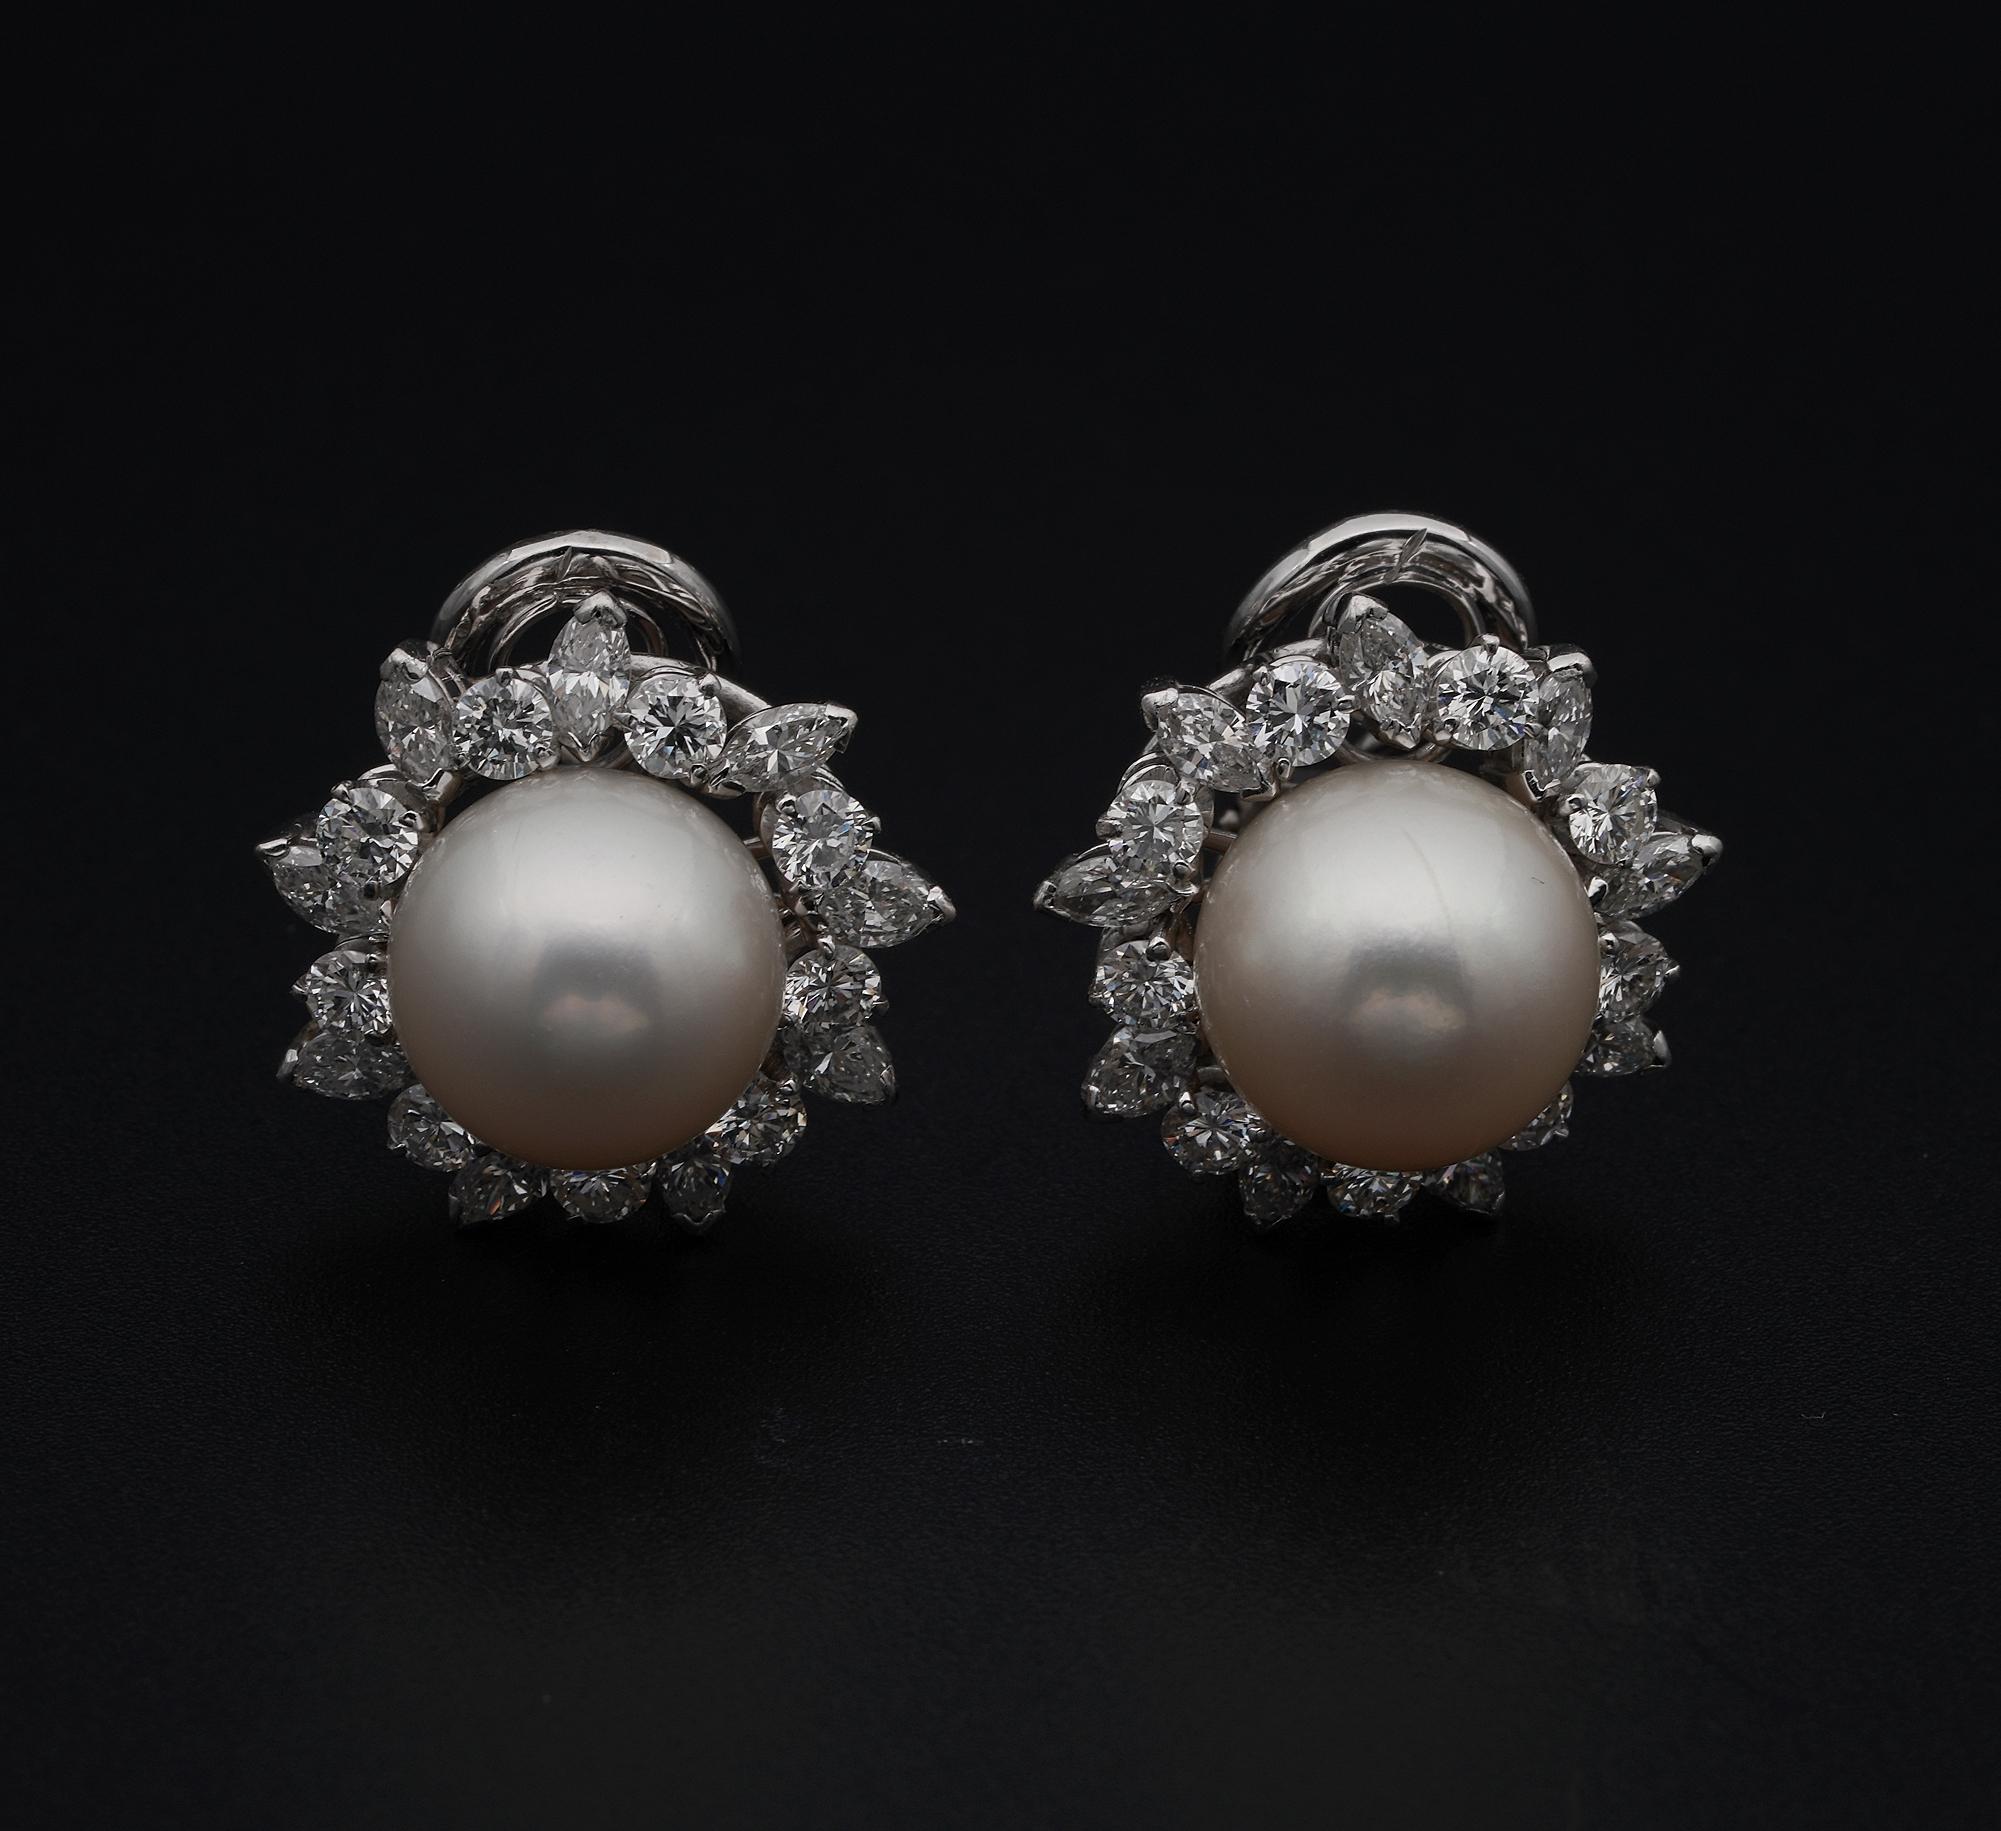 Sea Queen in Sparkle!

Classy must of sensational quality are these mid-century Pearl & Diamond earrings – Italian origin – 1960 ca
Pearls were always a favourite accessory of 20th century style icon Grace Kelly, both during her screen star days and